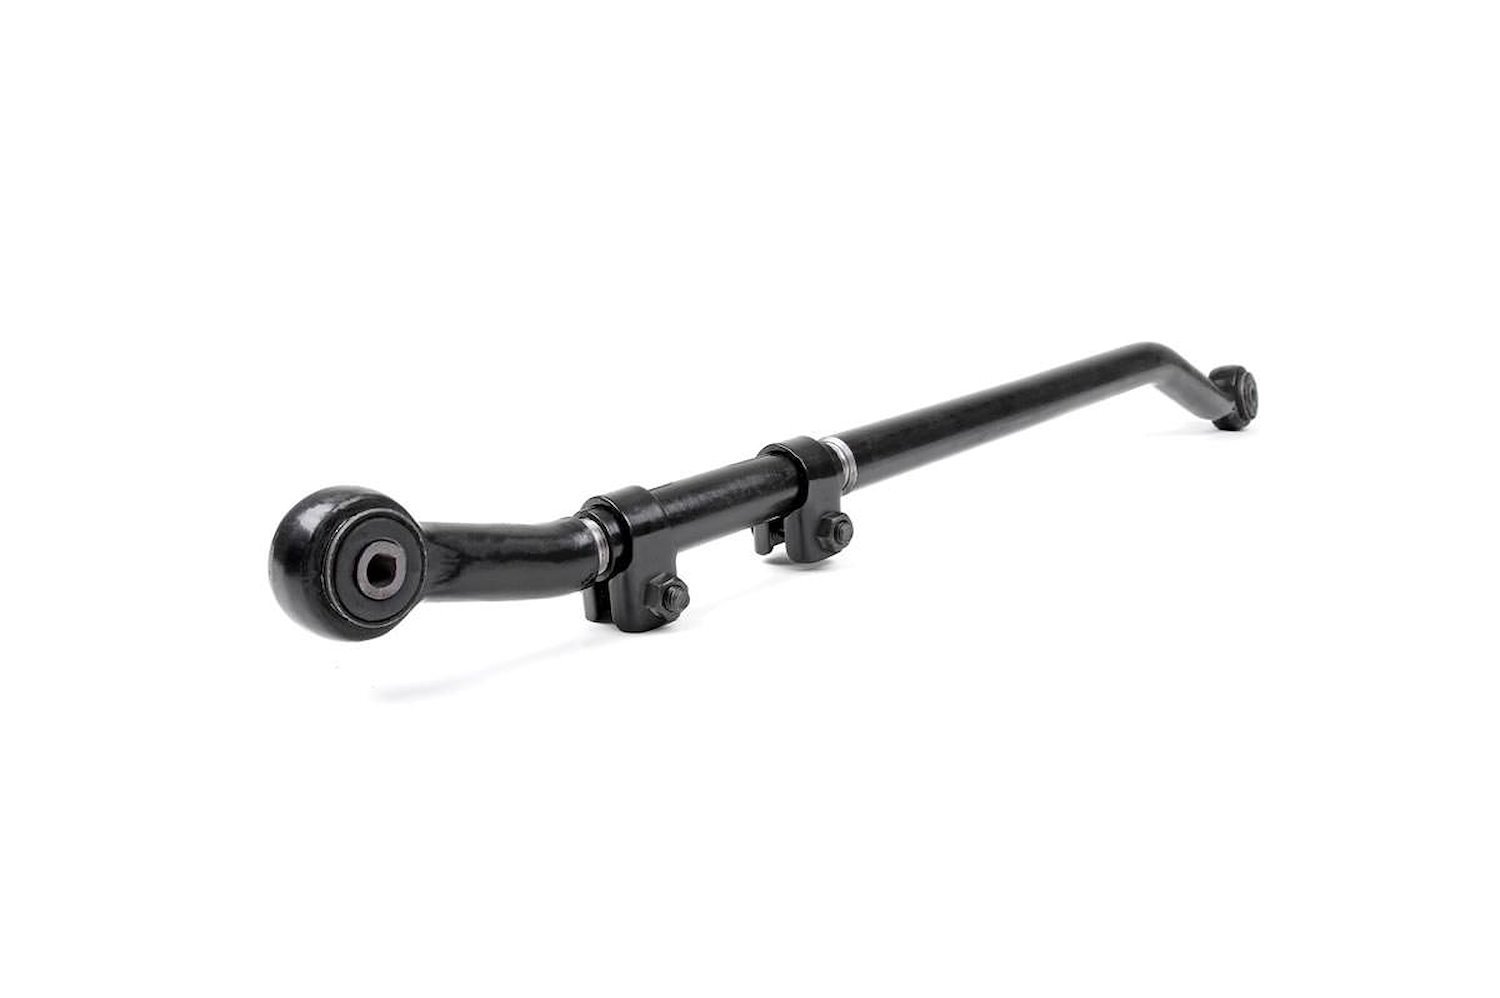 1075 Rear Forged Adjustable Track Bar for 0-6-inch Lifts